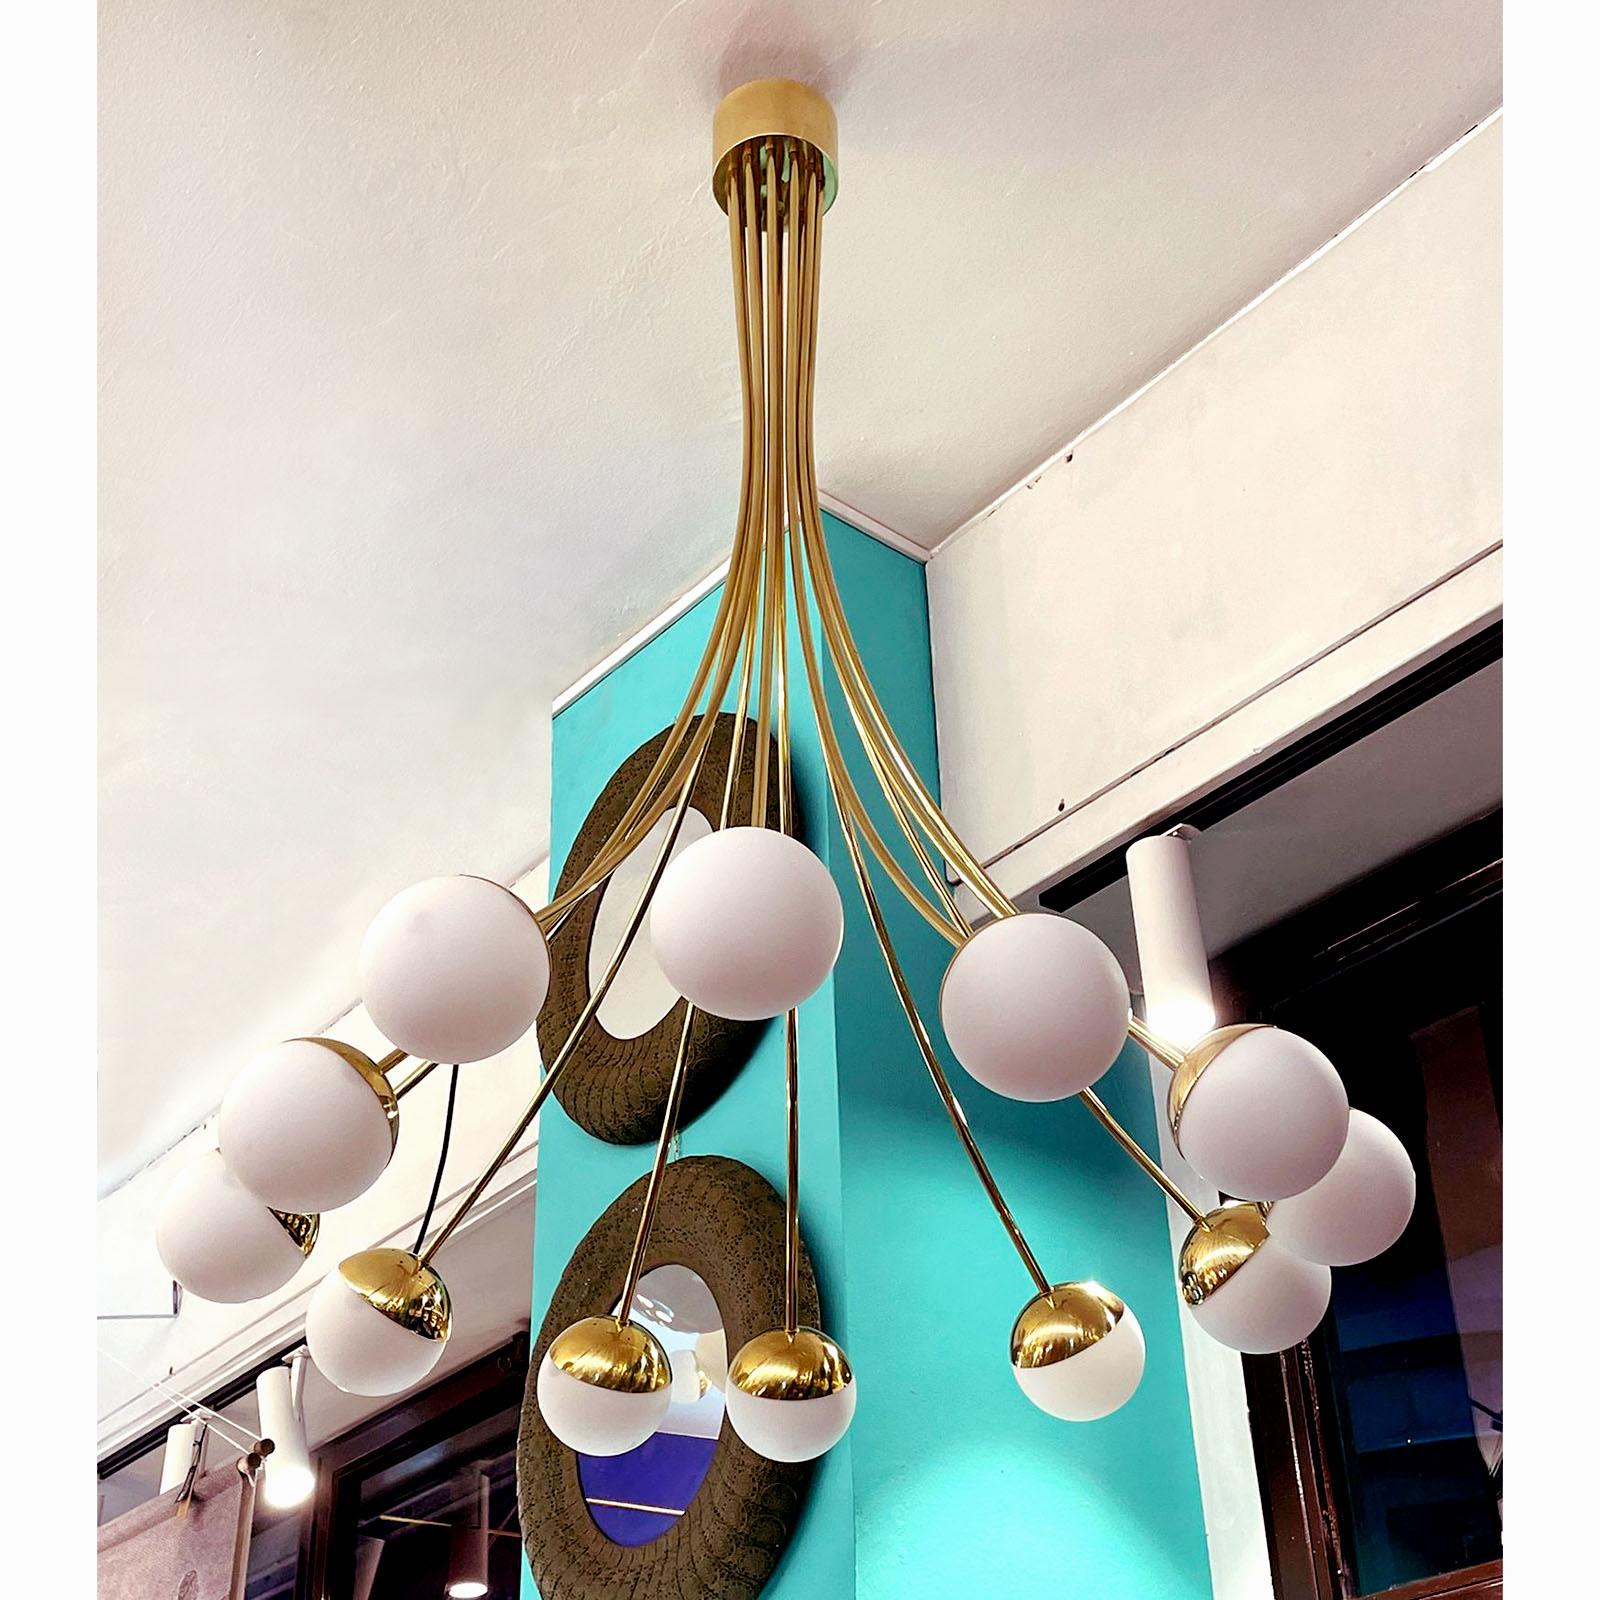 Beautiful Italian brass chandelier, mid-century tyle design. Ten curved brass arms, each ending with an opaline globe, to create an elegant lighting fixture that will make the focus point of your room.
Standard equipped with E14 sockets for EU